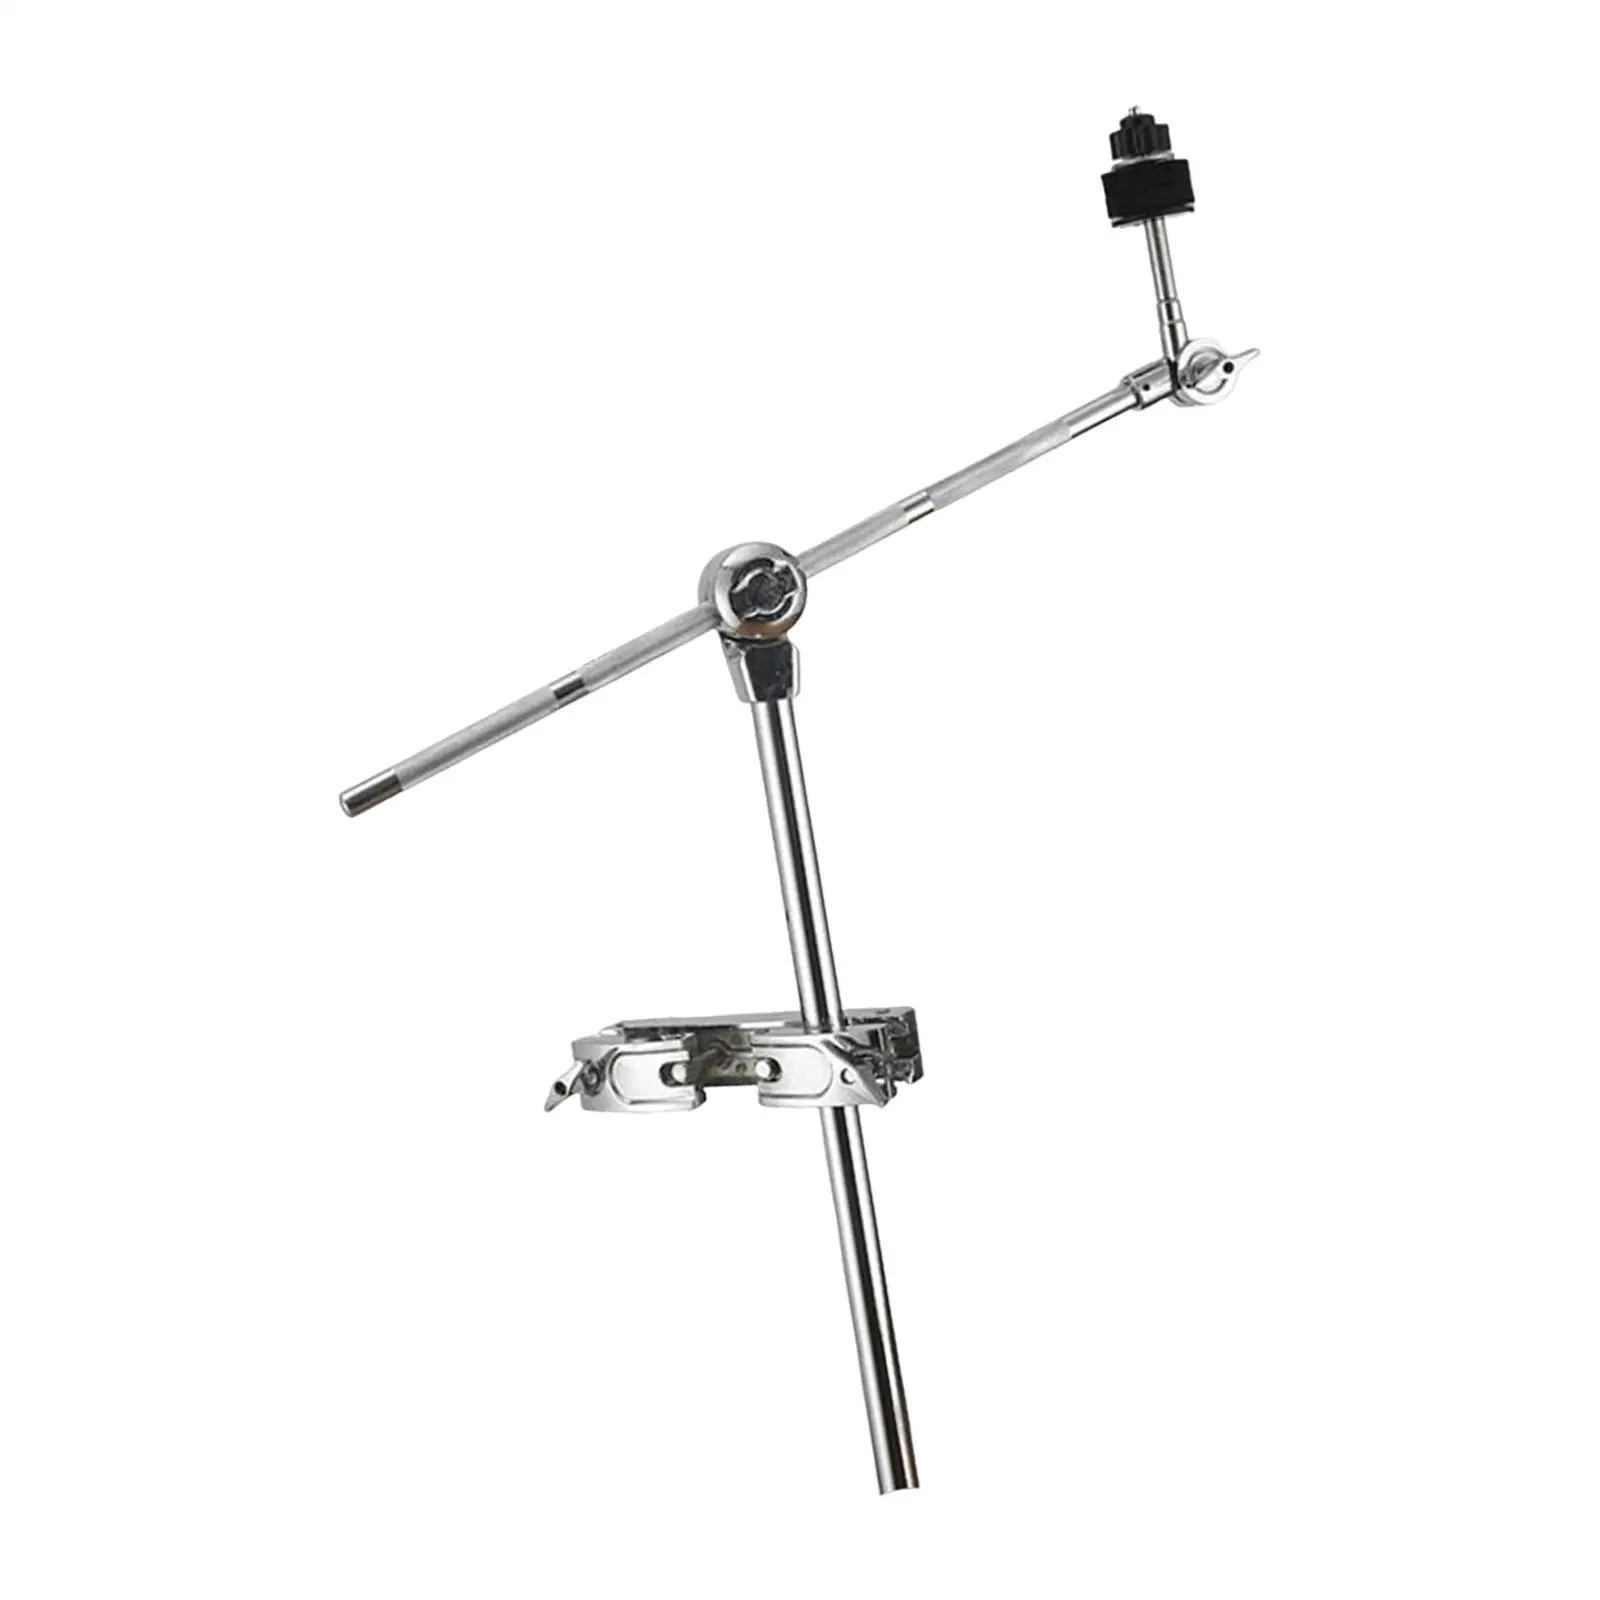 Cymbal Attachment Clamp Mount Cymbal Clip Cymbal Arm Stand for Percussion Instrument